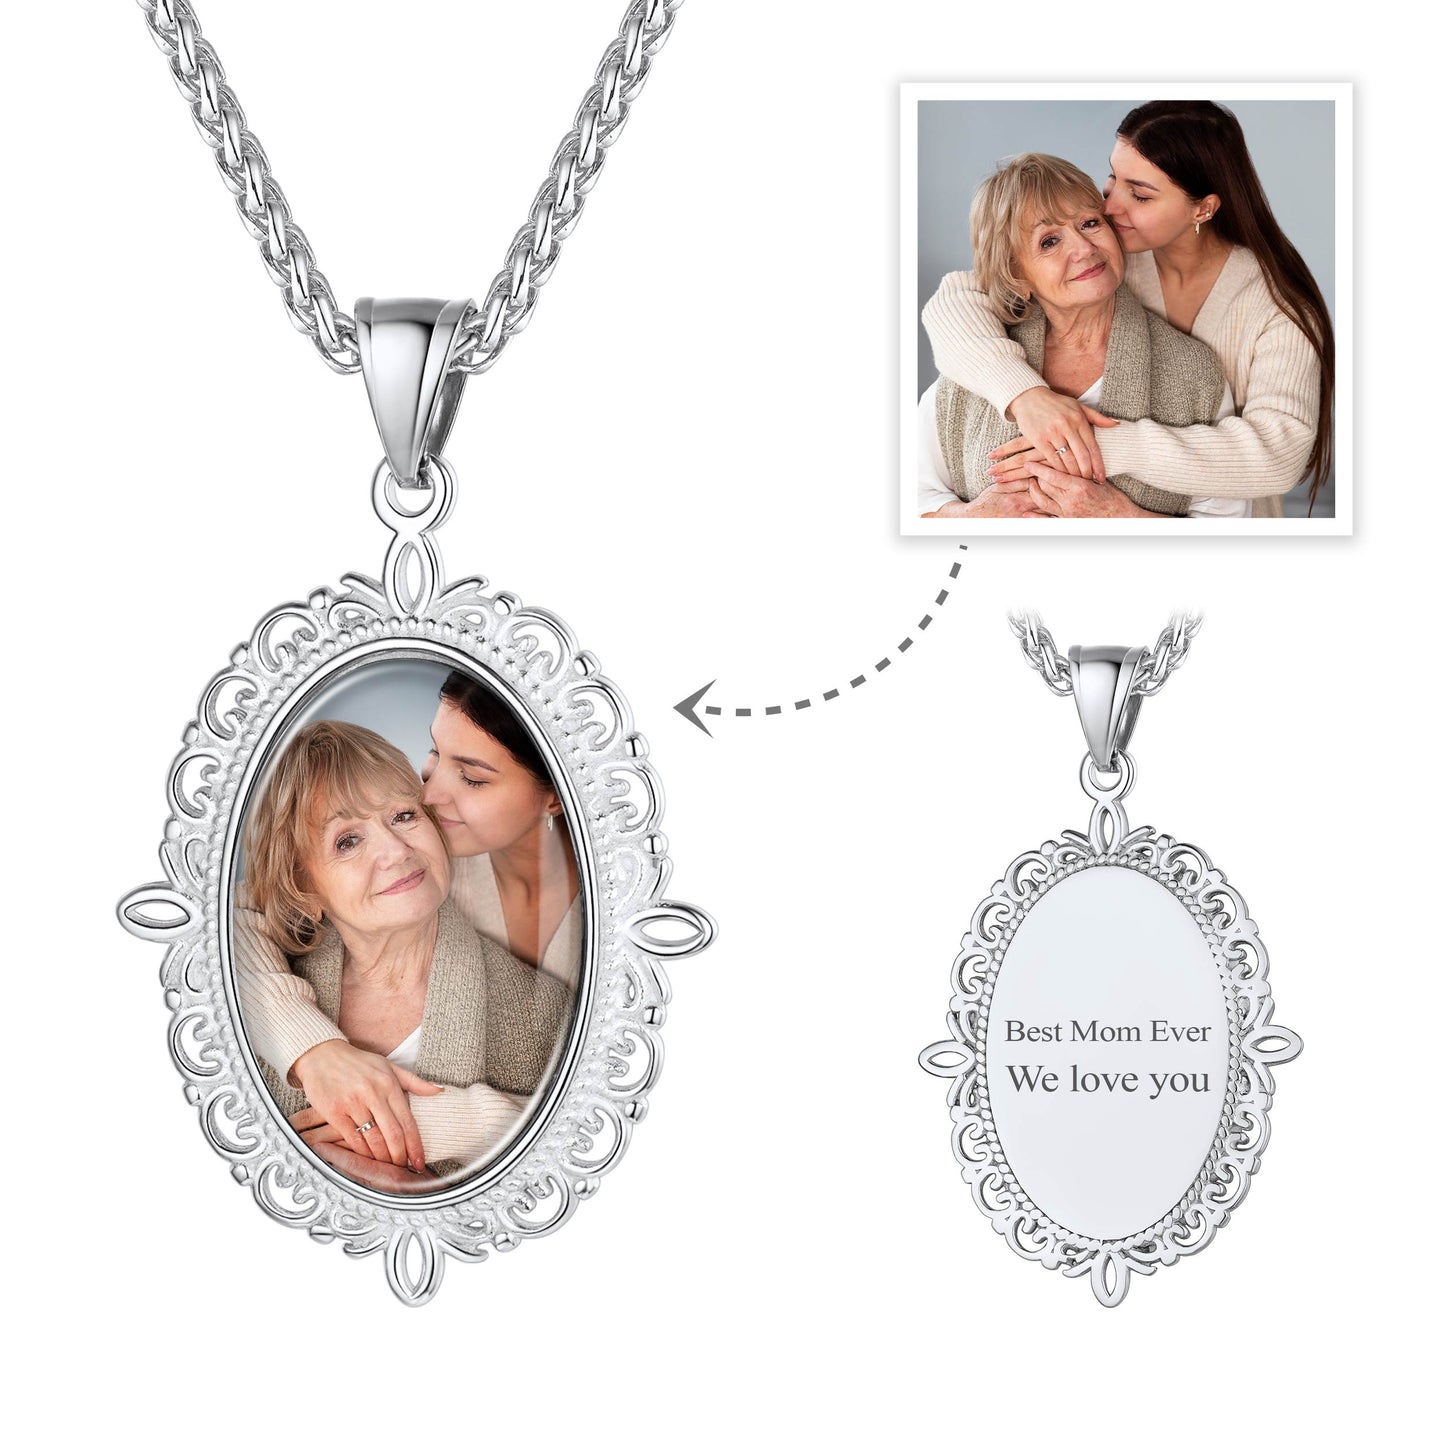 Personalized Oval Picture Necklace with Message Engraved On